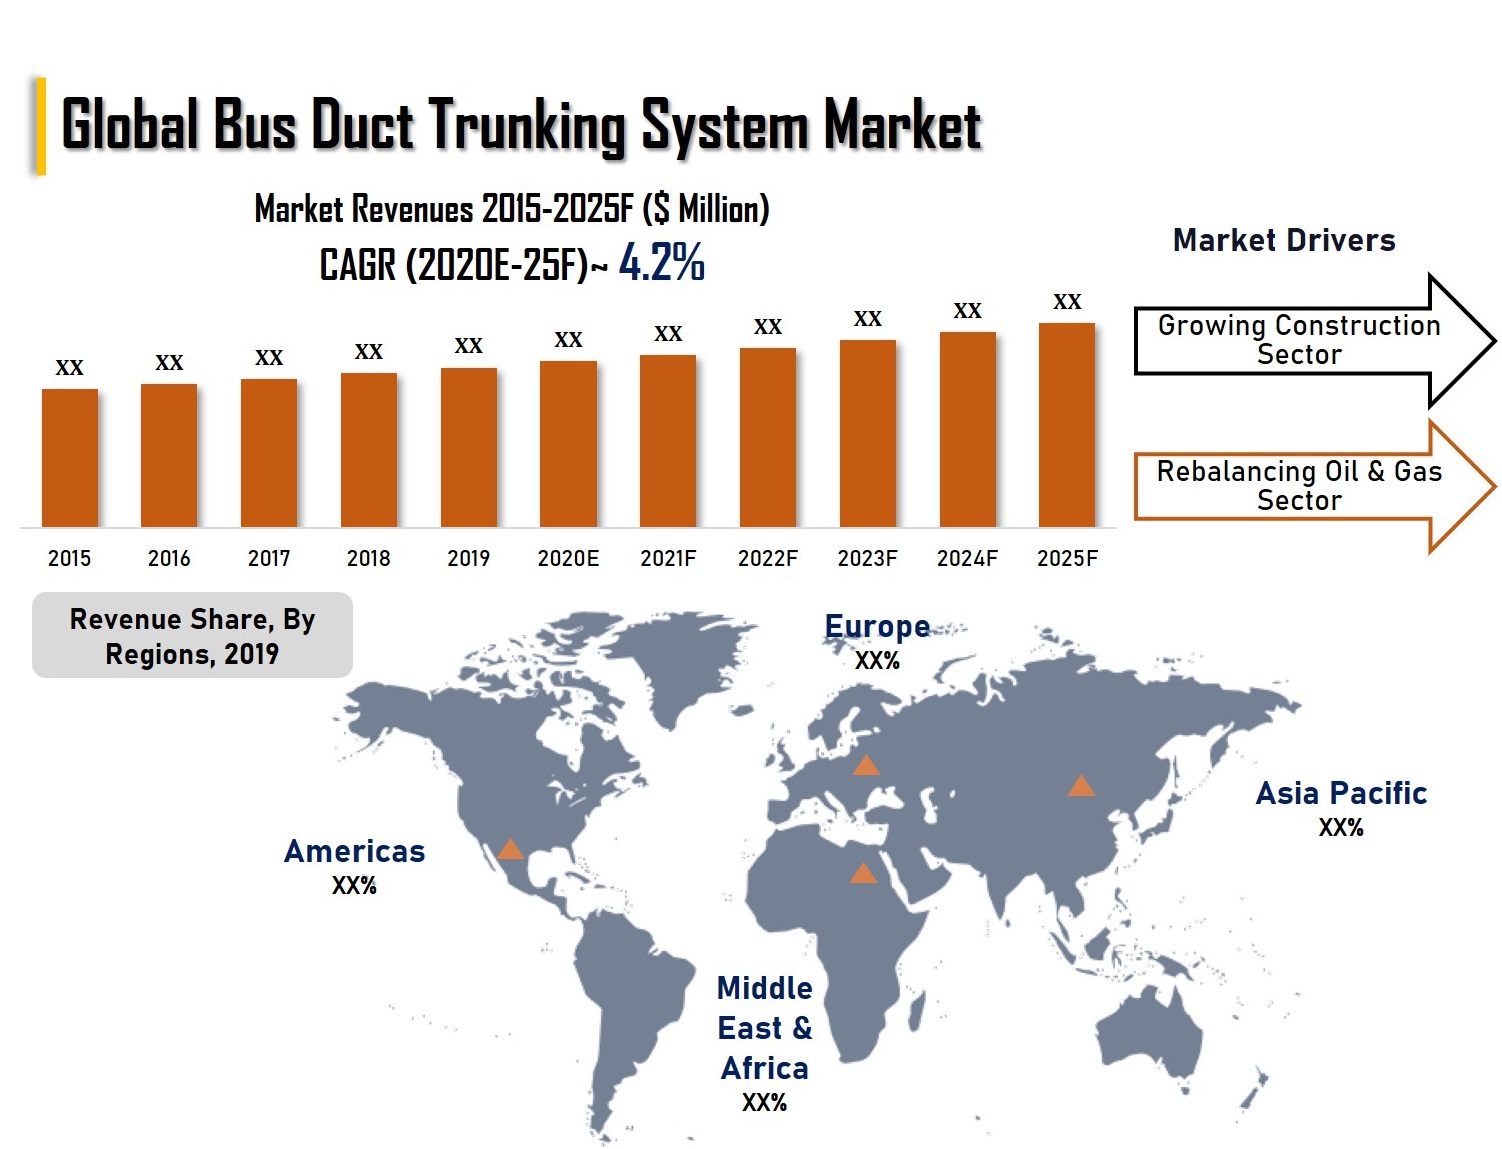 Global Bus Duct Trunking System Market